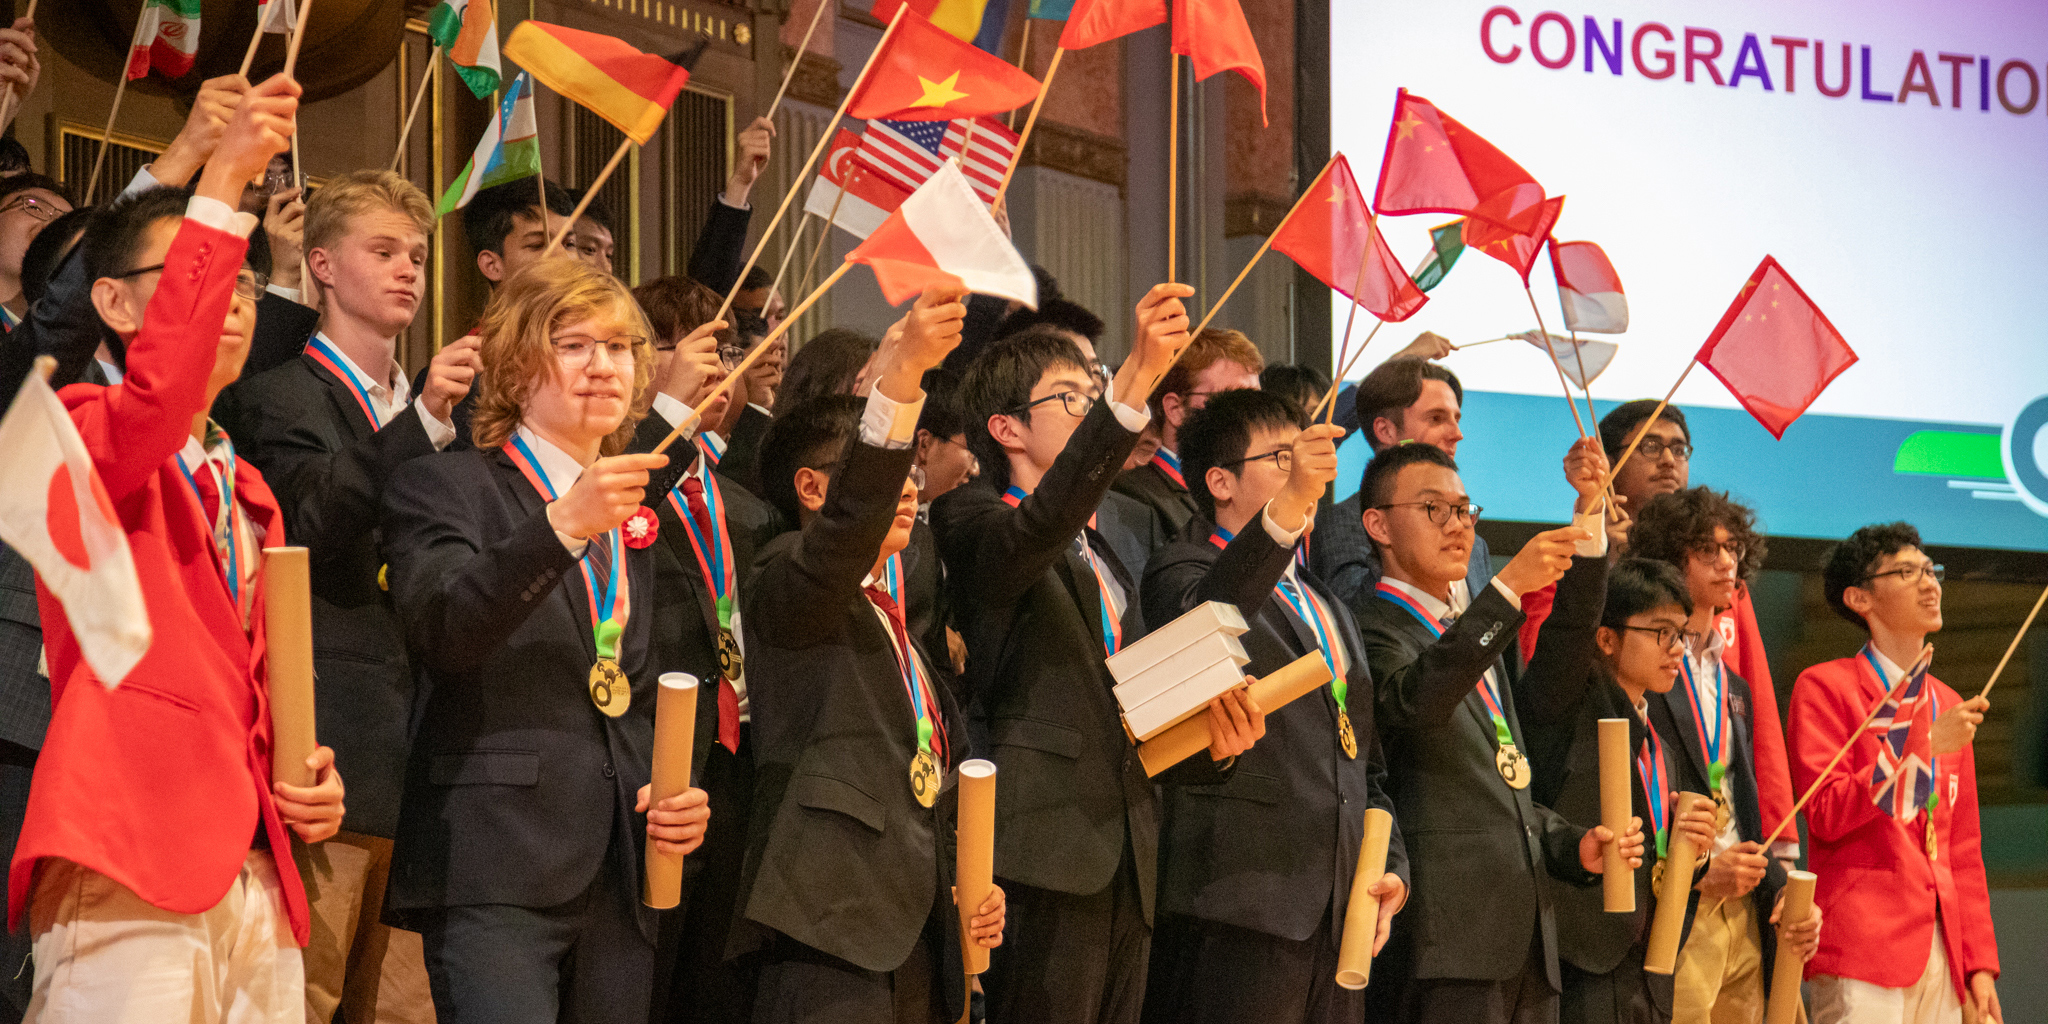 People standing together. They are holding diplomas and their nation’s flags. Link to press release: More than just winning medals.